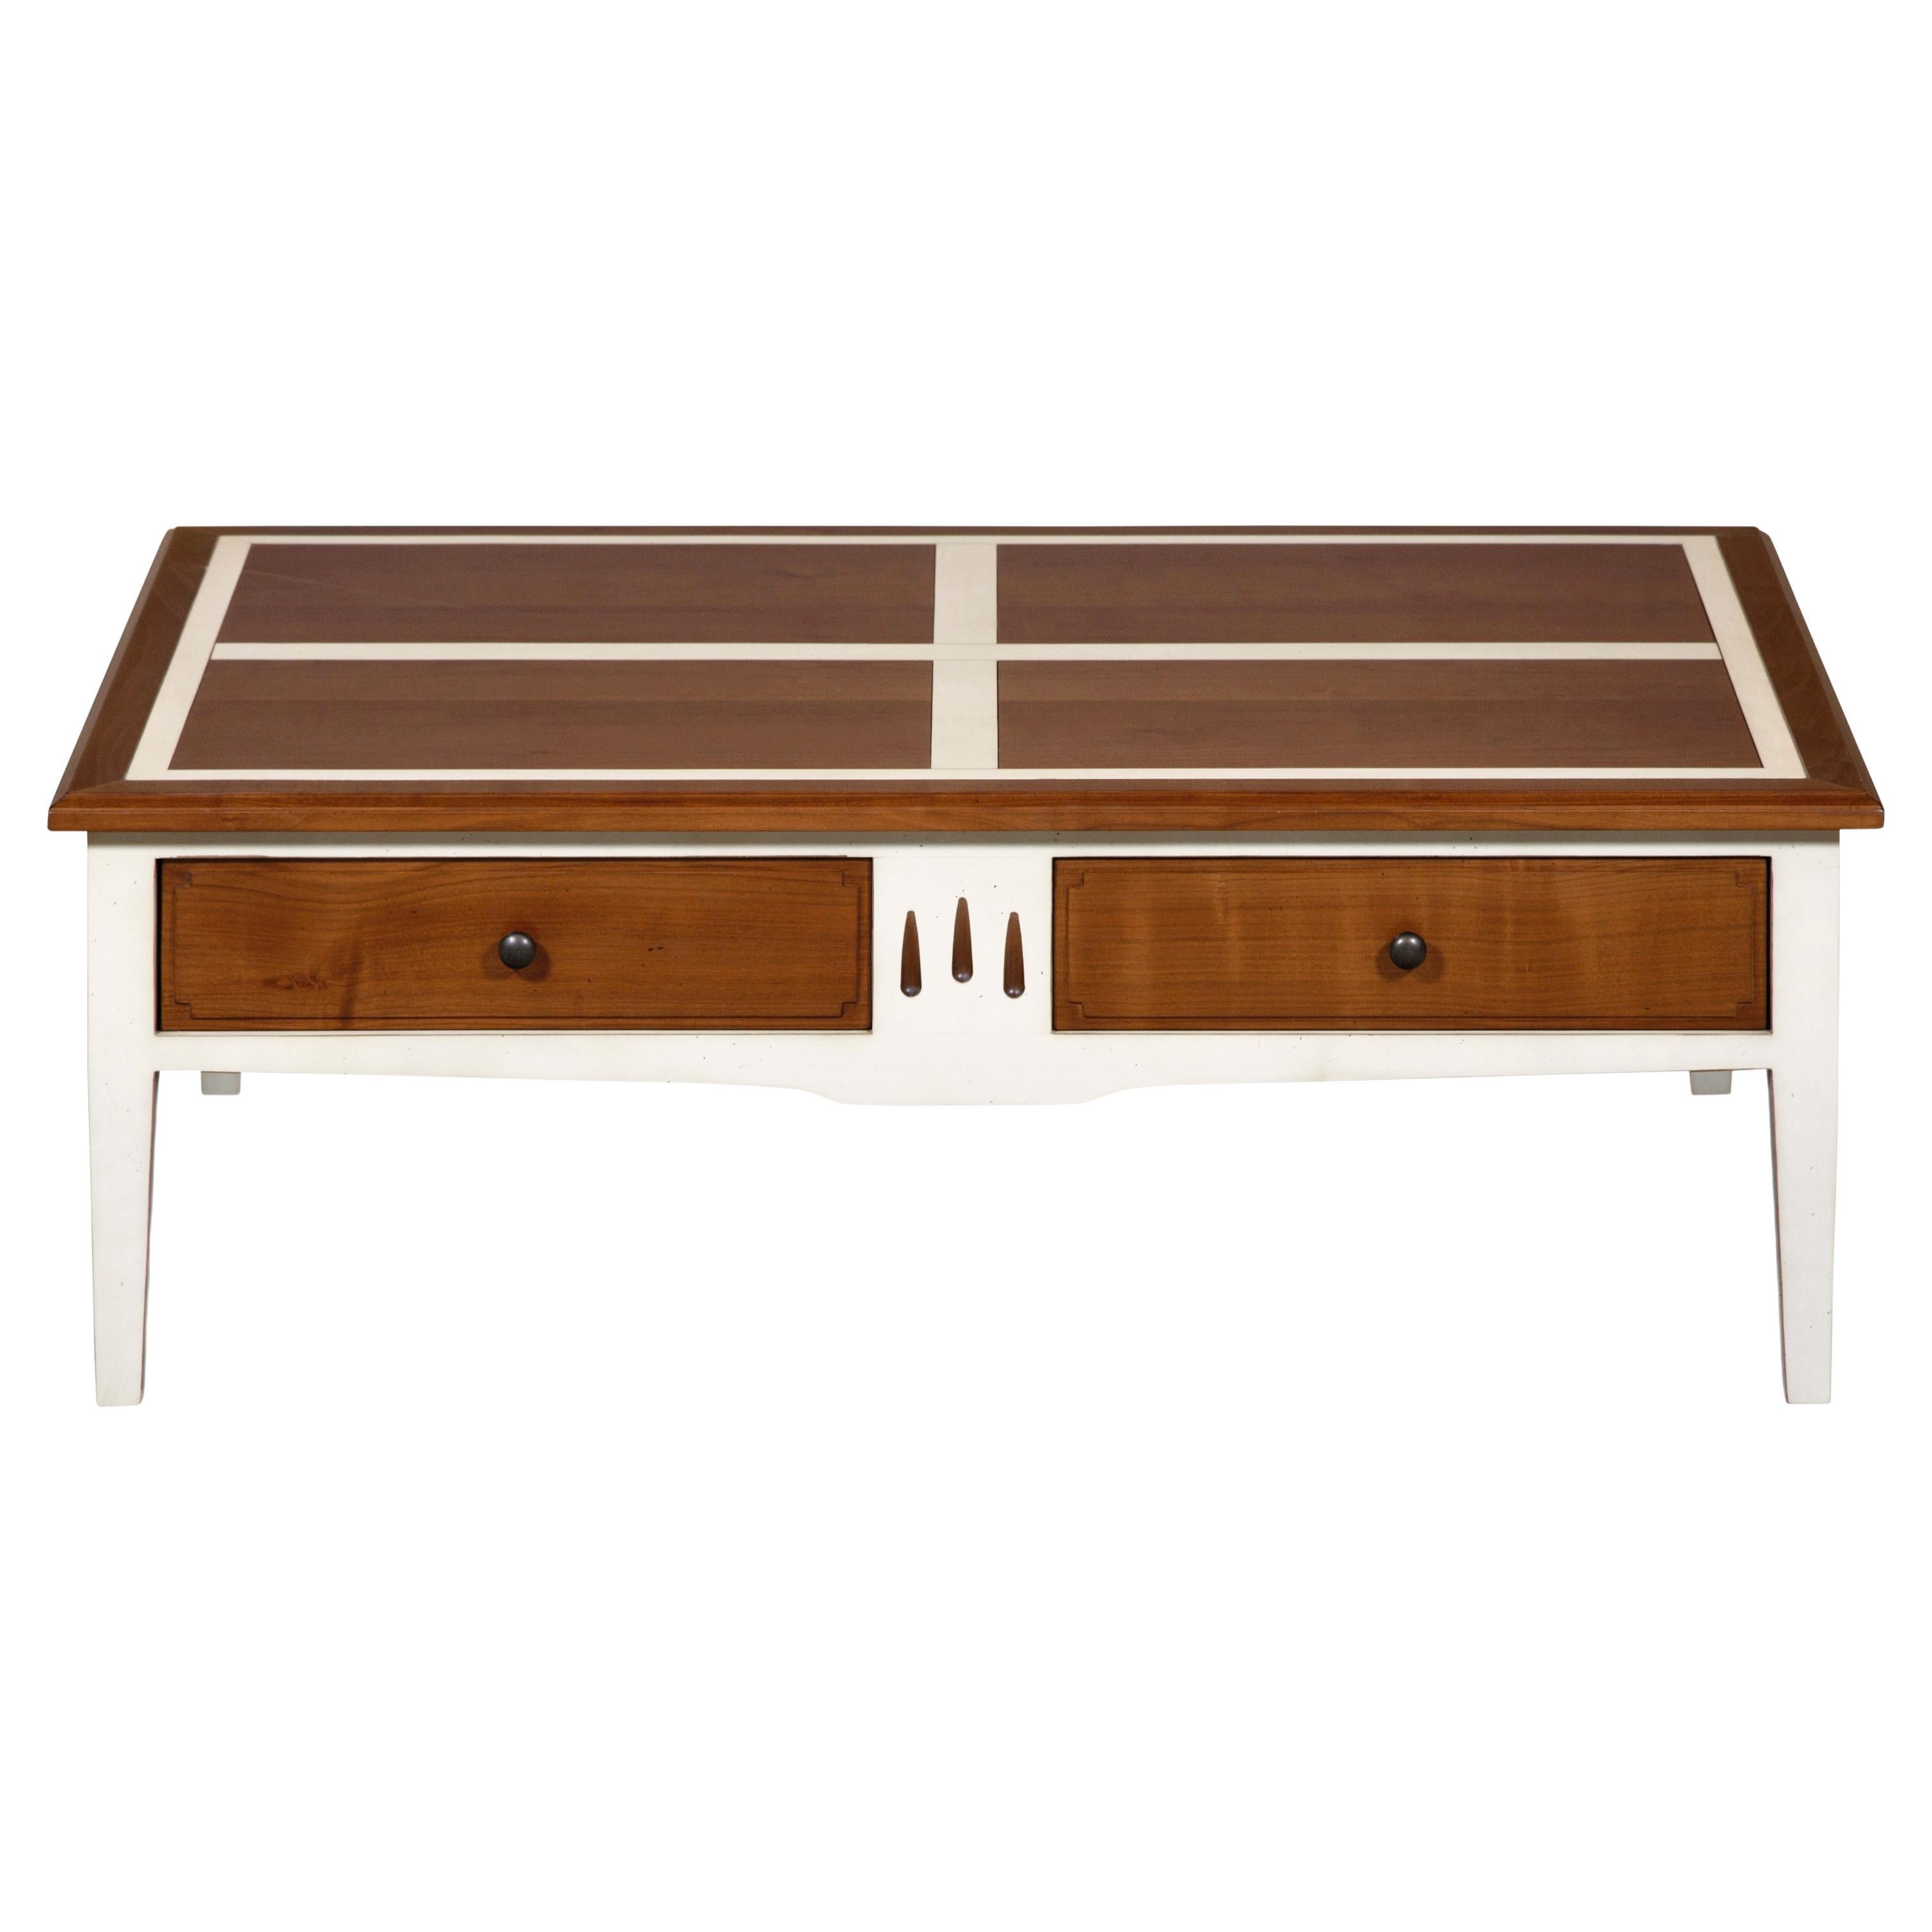 2-Drawer Coffee Table in Cherry, a French Directoire Style Re-Interpretation 